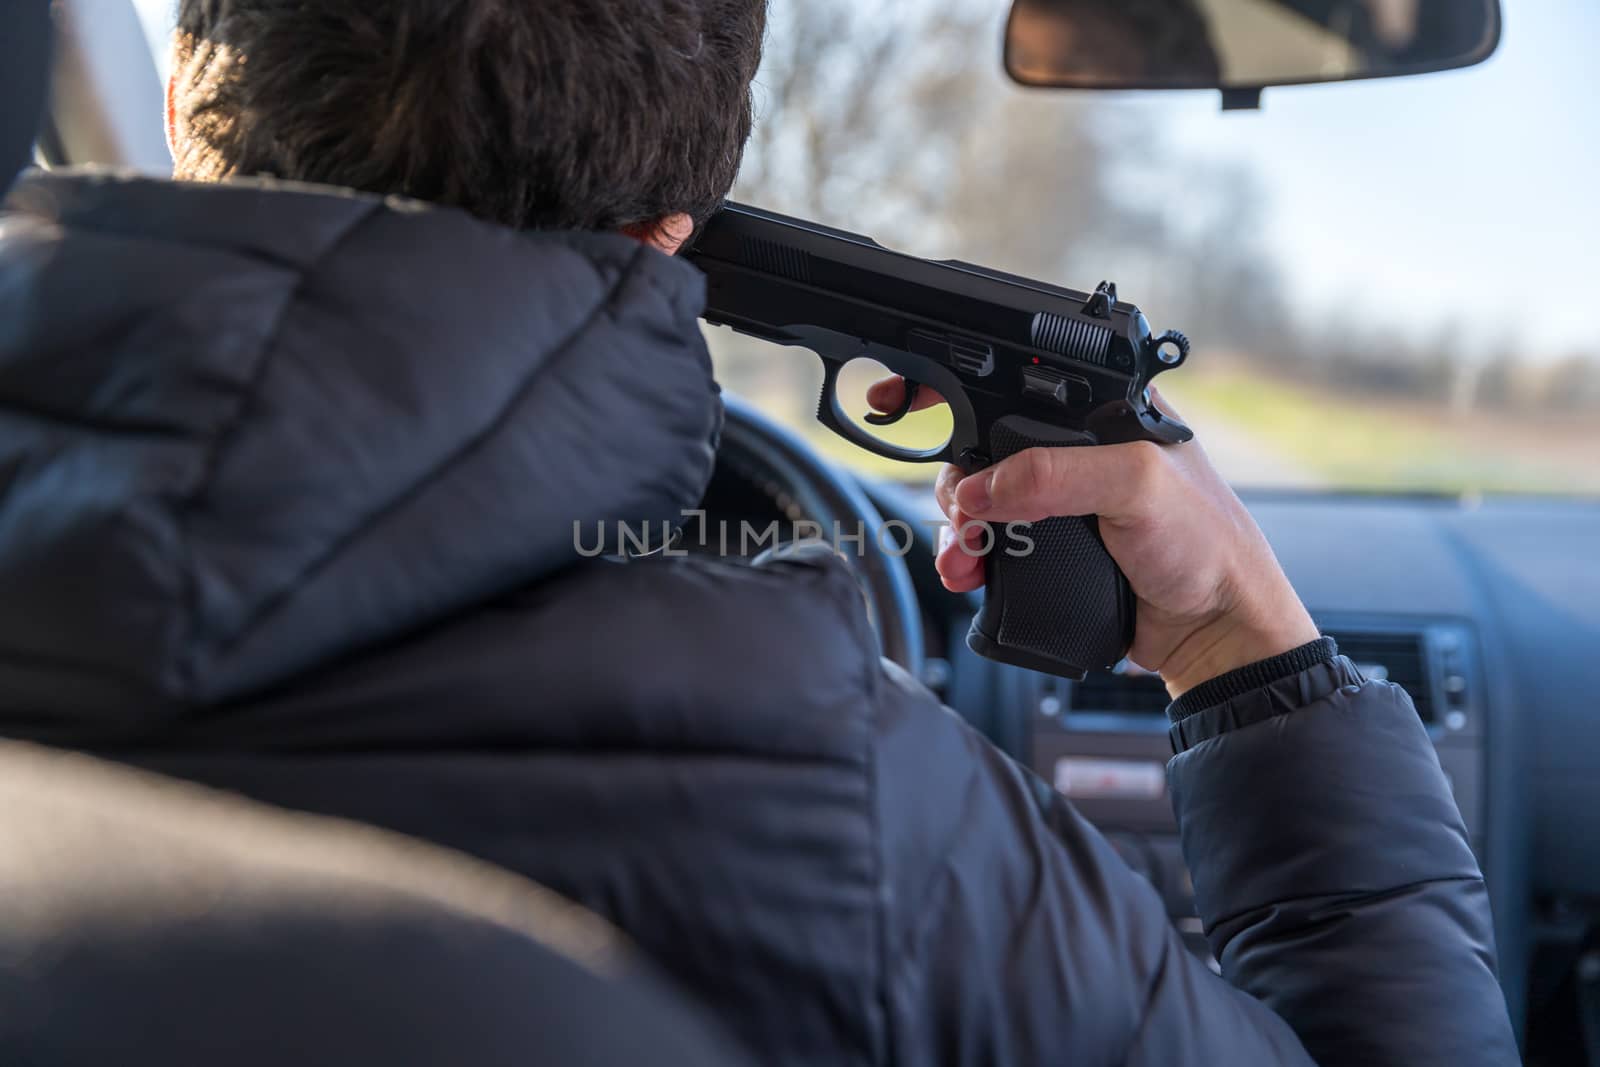 a man aiming a gun at his own head playing Russian roulette or killing himself.